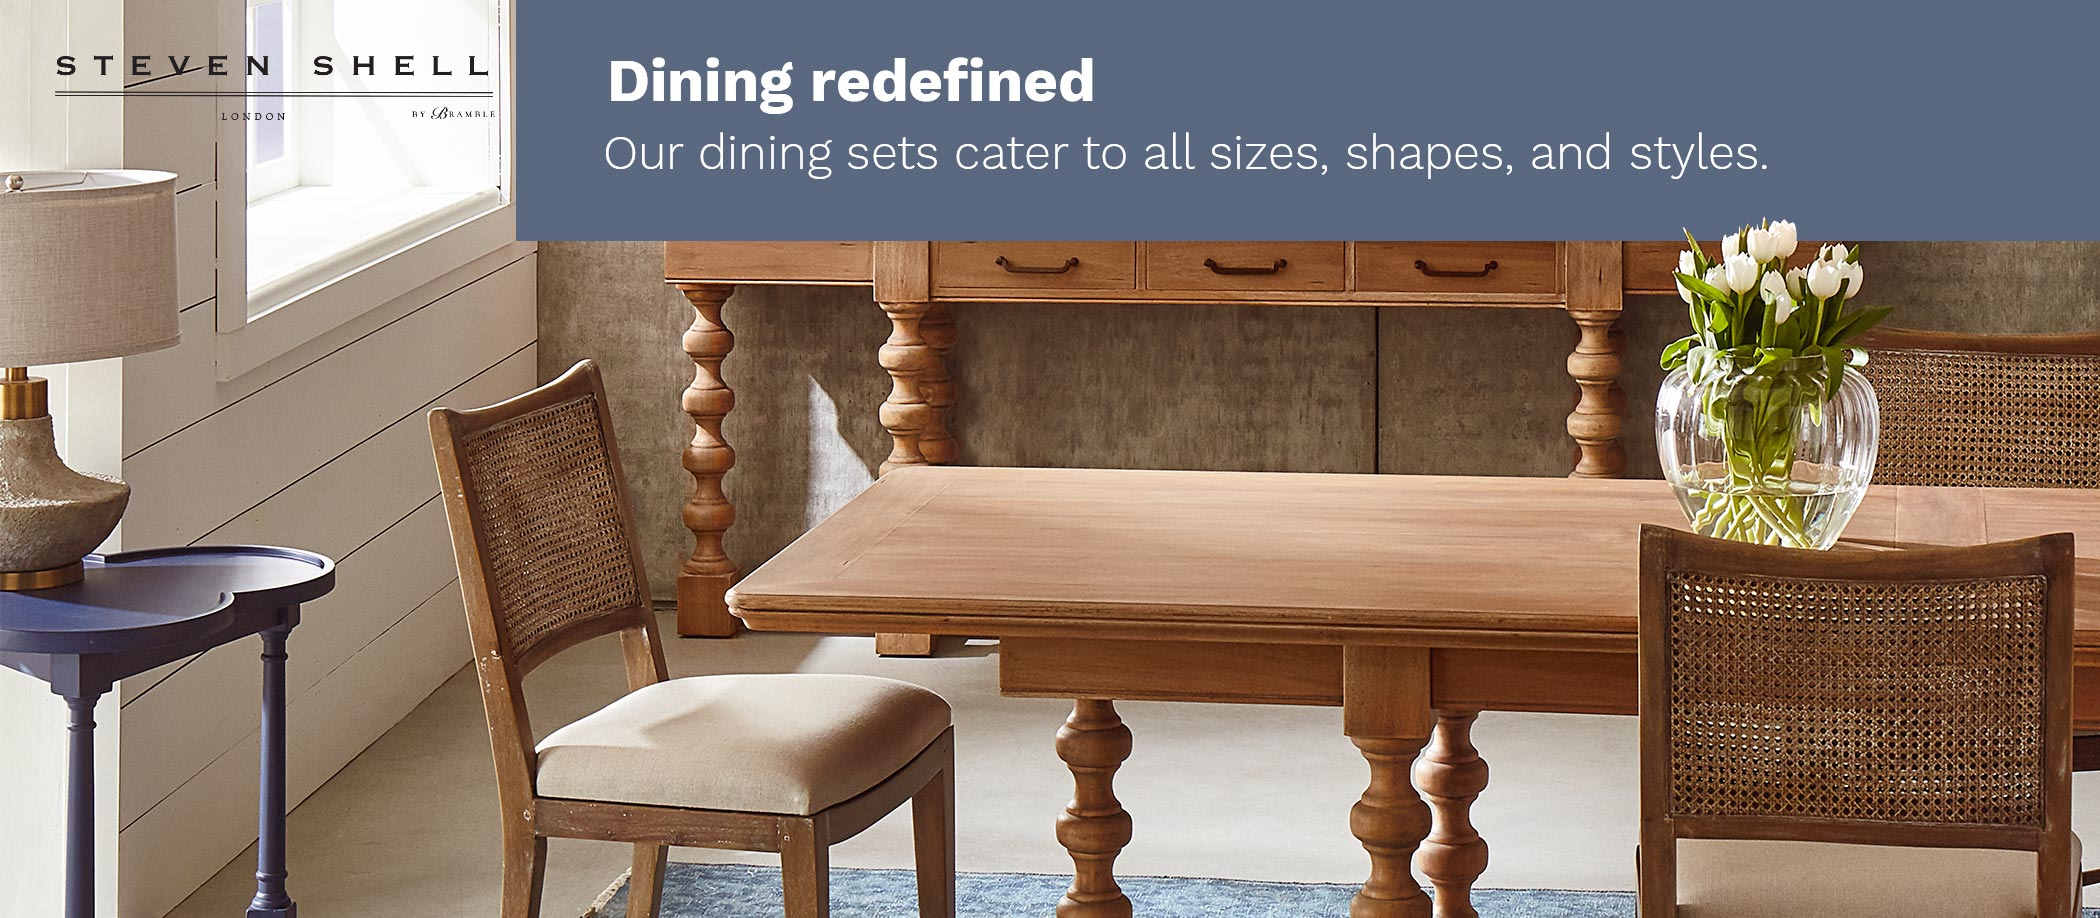 Dining redefined